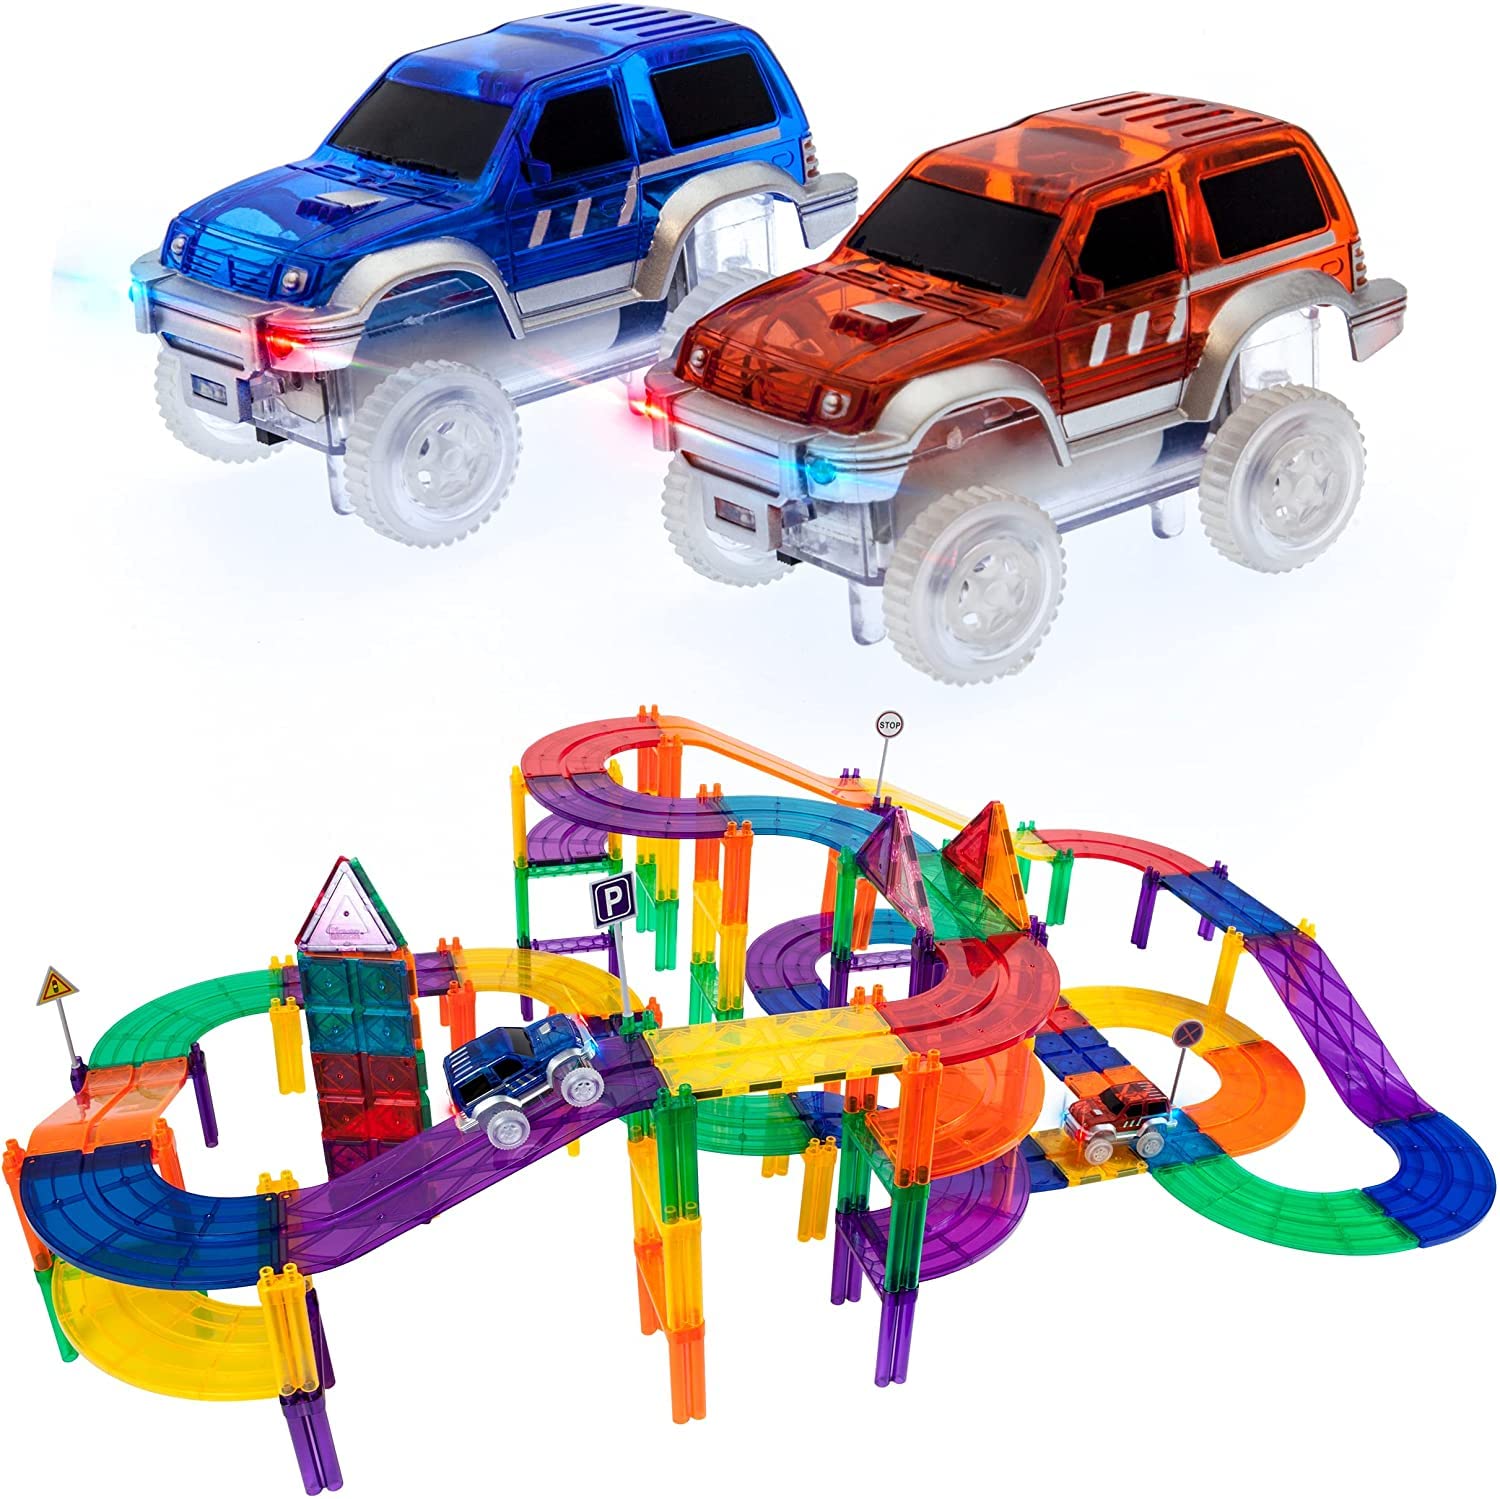 PicassoTiles 2 Piece Race Track Truck Cars + 100pcs Race Car Track Magnet Building Blocks, Swift Highly Detailed Cars Accessories in Bulk Package Work with STEM Magnetic Tile Race Track, 2 LED Cars